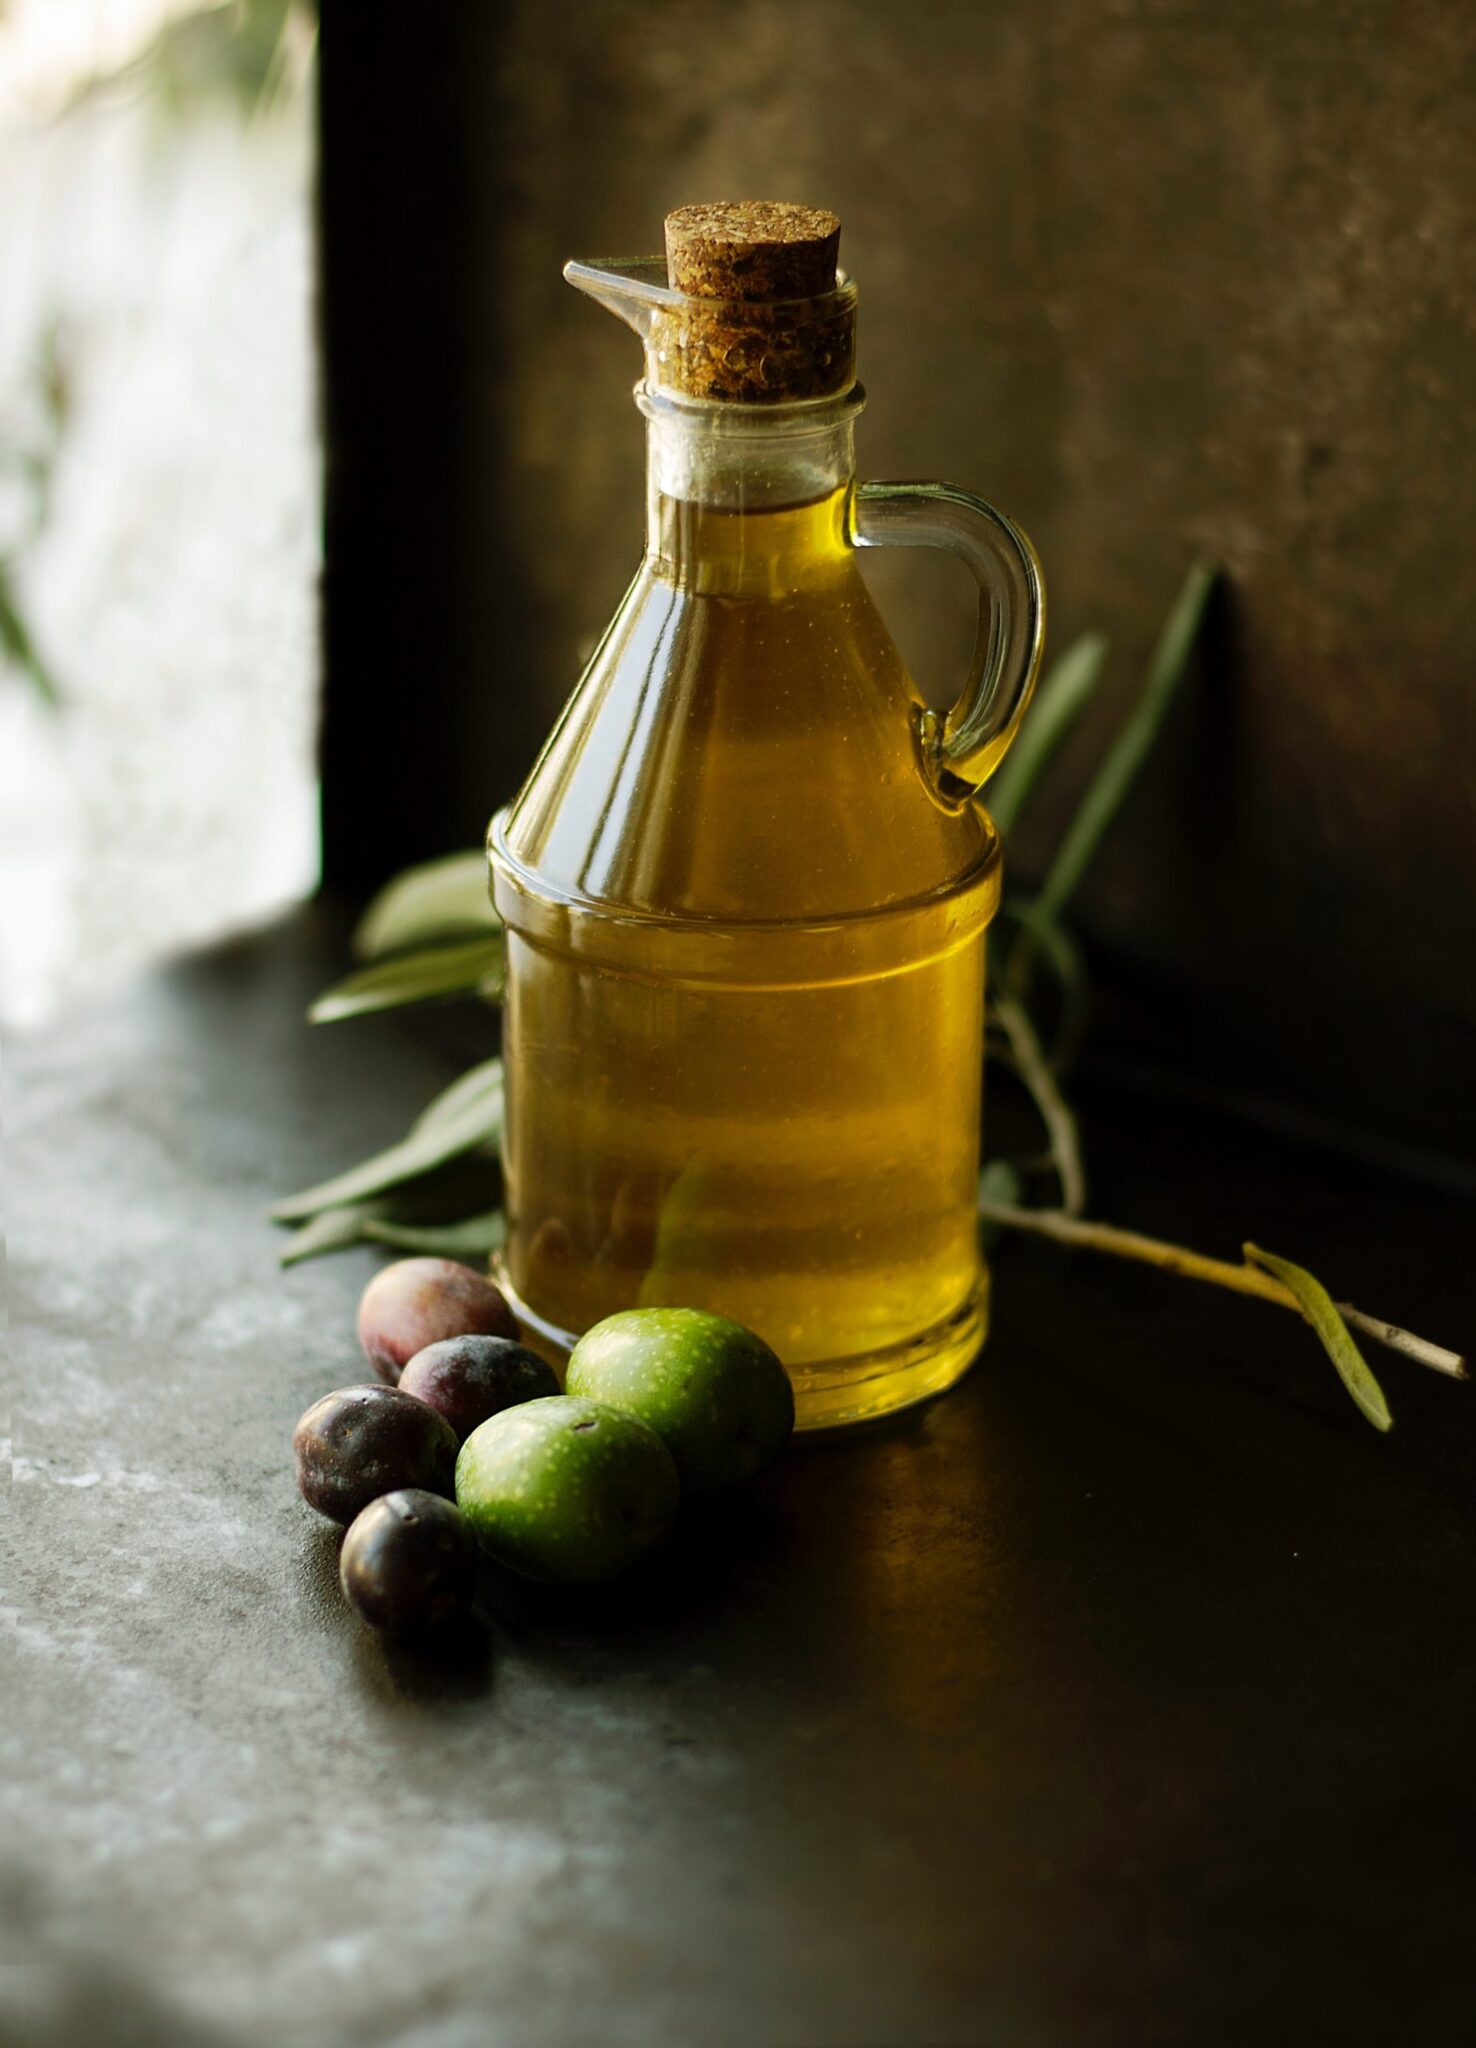 How to Make Cannabis Olive Oil (Or Any Oil)